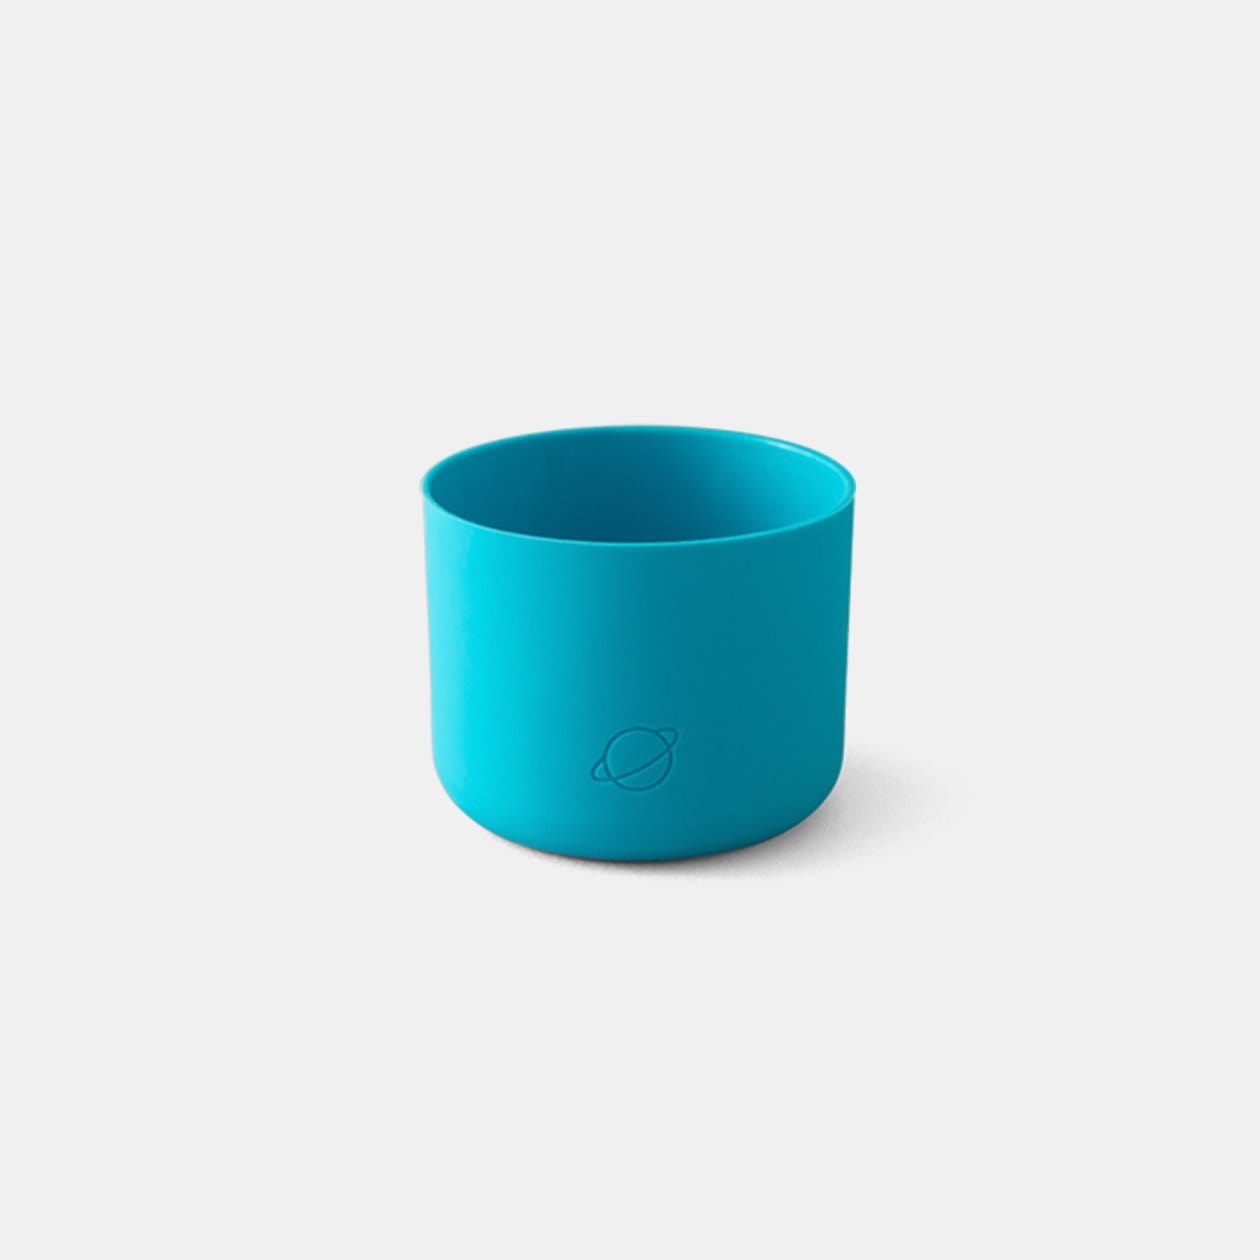 Water Bottle Boot in Teal by PlanetBox